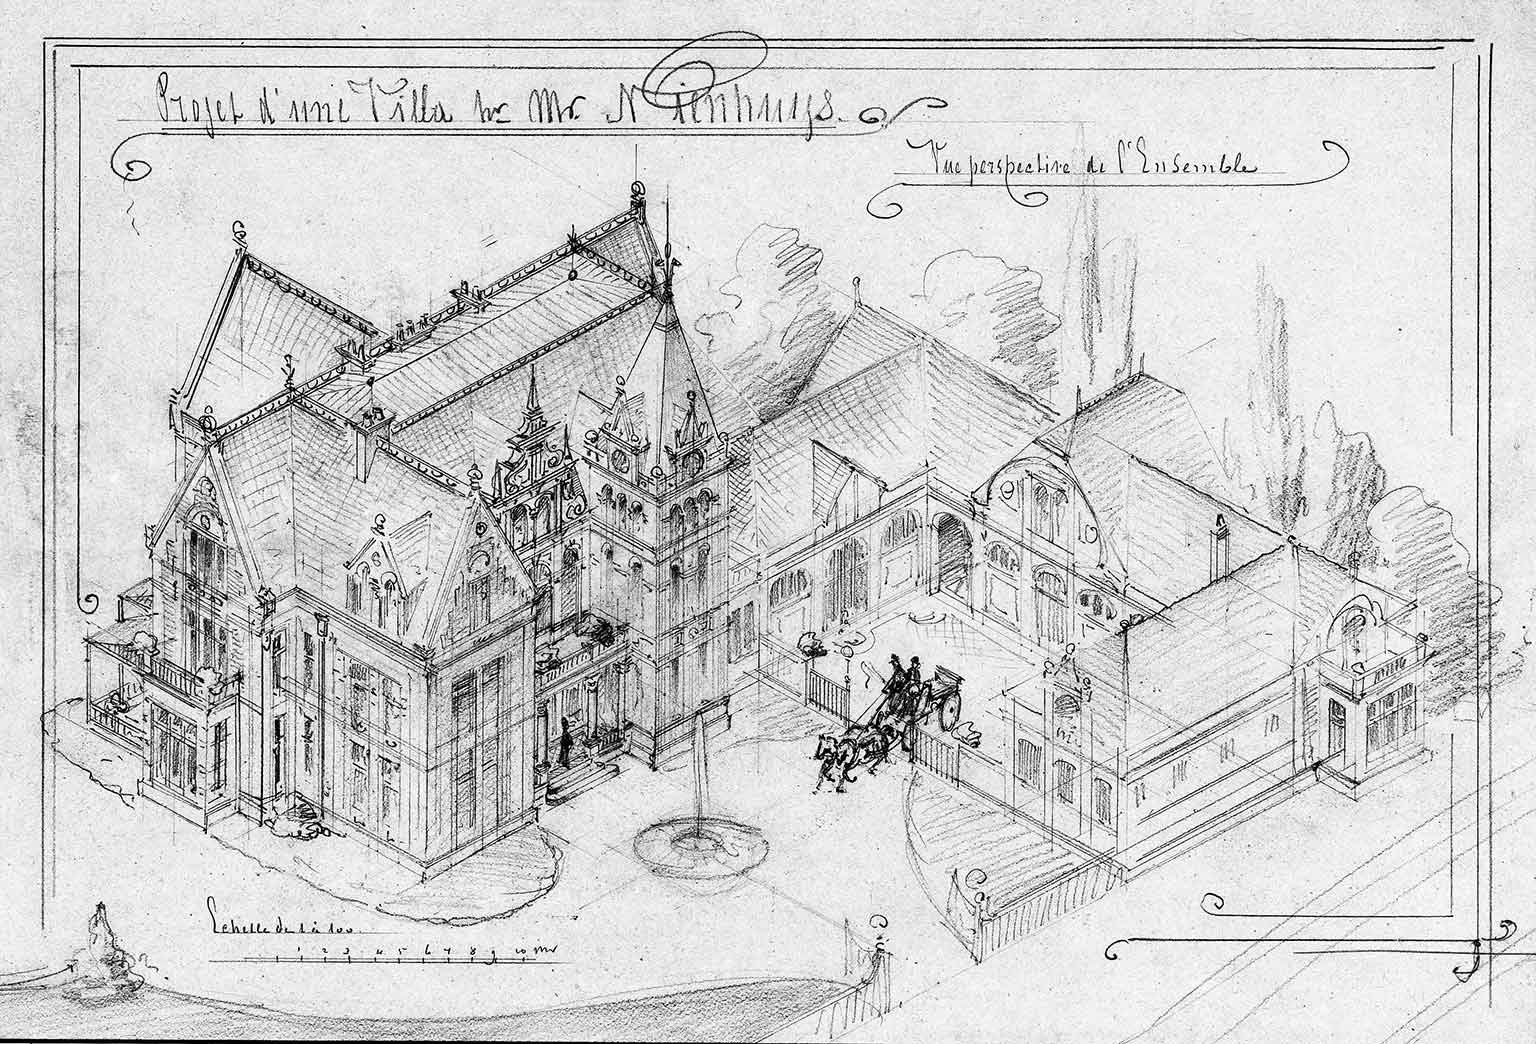 Birds eye view of Villa Medan in Baarn, drawing from 1883 by architect A. Salm